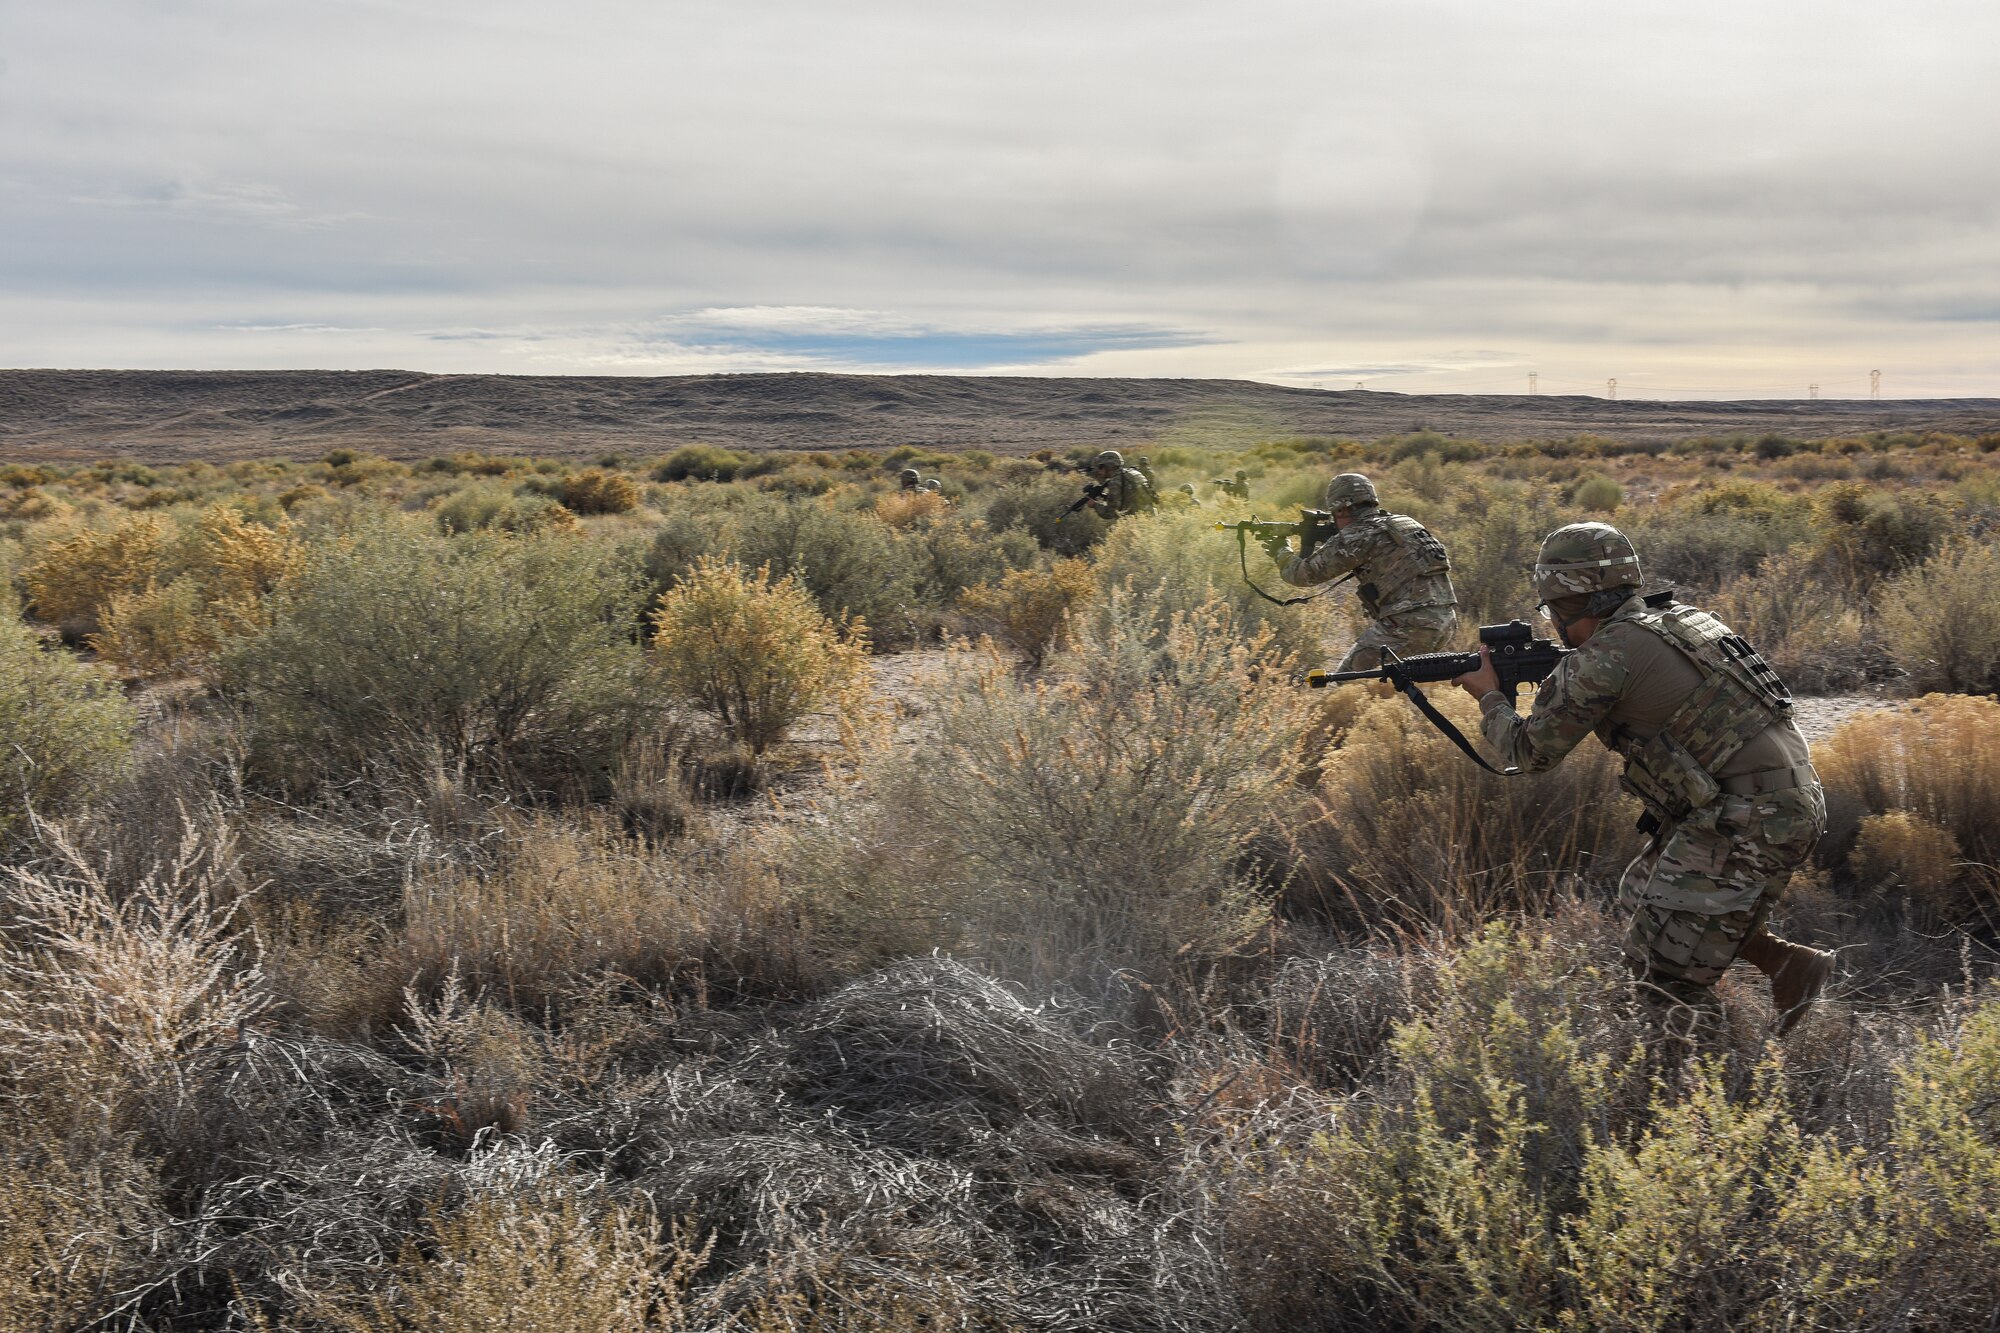 Security forces members advanced towards opposing forces during training.